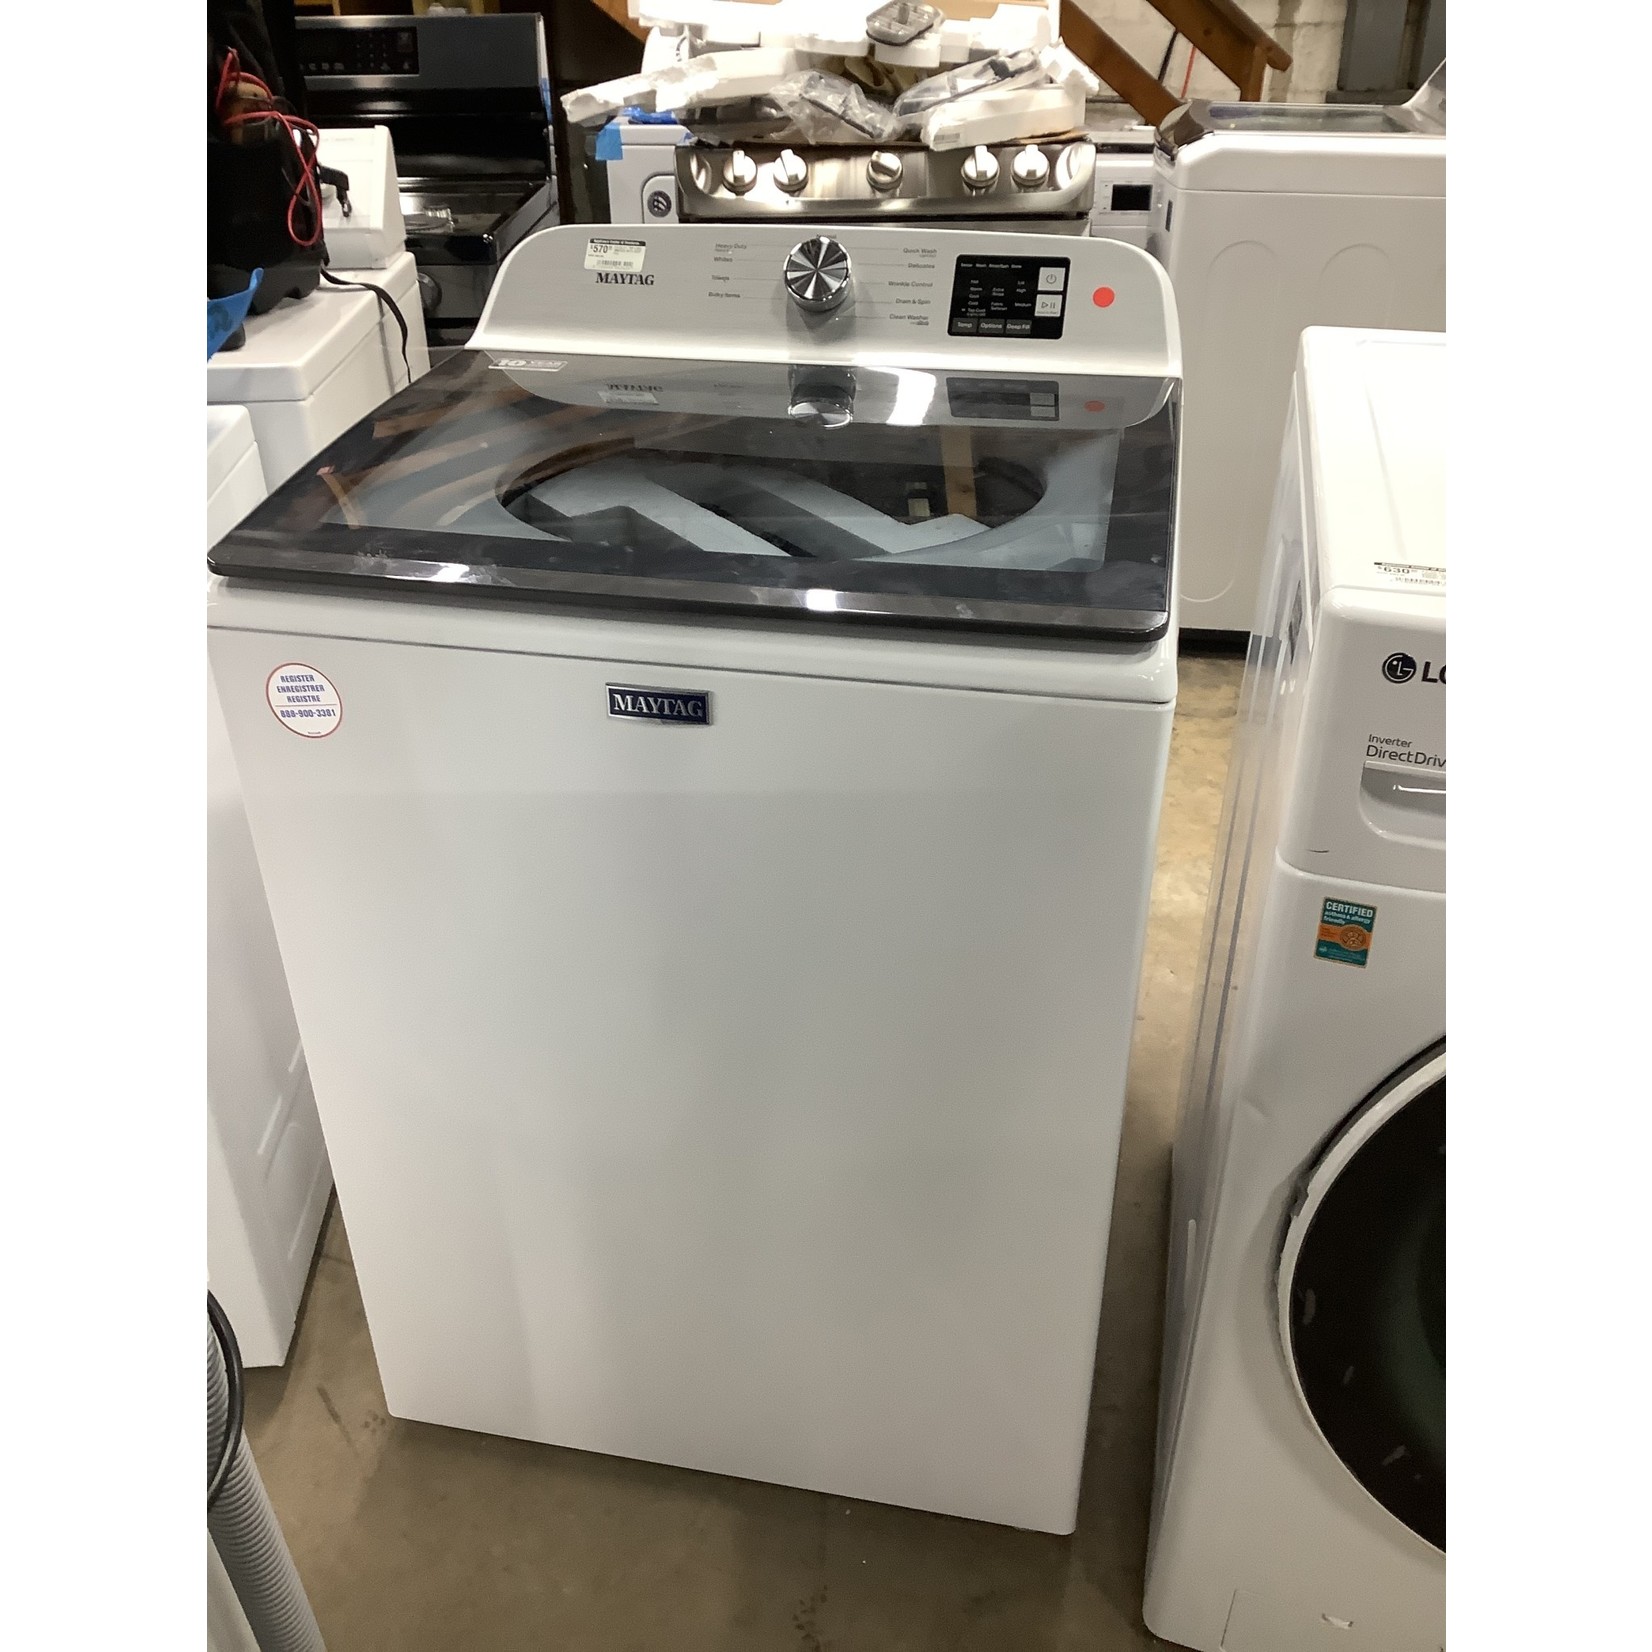 Maytag 4.8 CU.FT. TOP LOAD WASHER WITH DEEP FILL